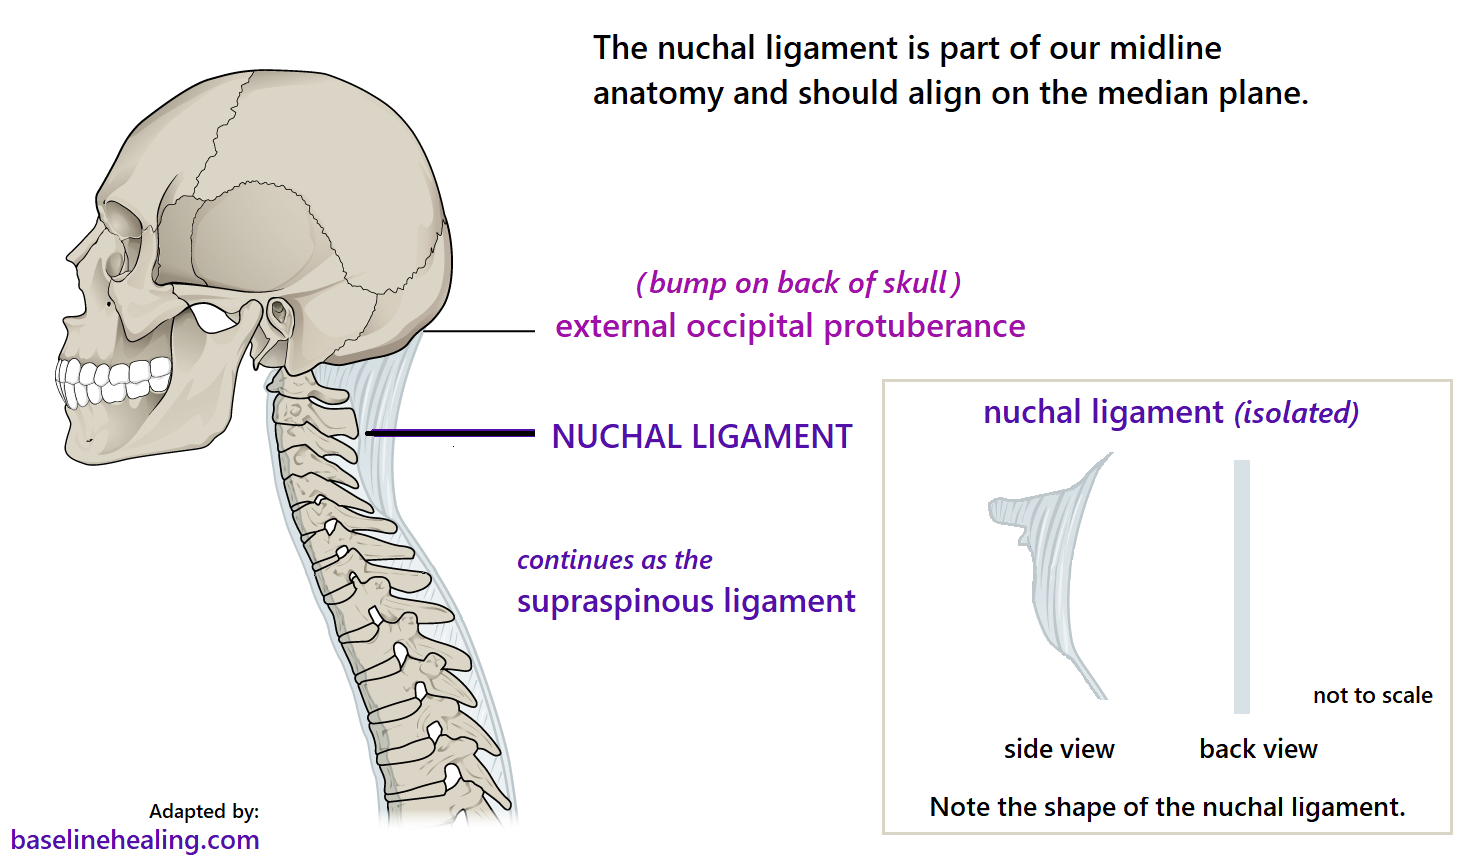 What Is The Definition Of Nuchal Ligament?